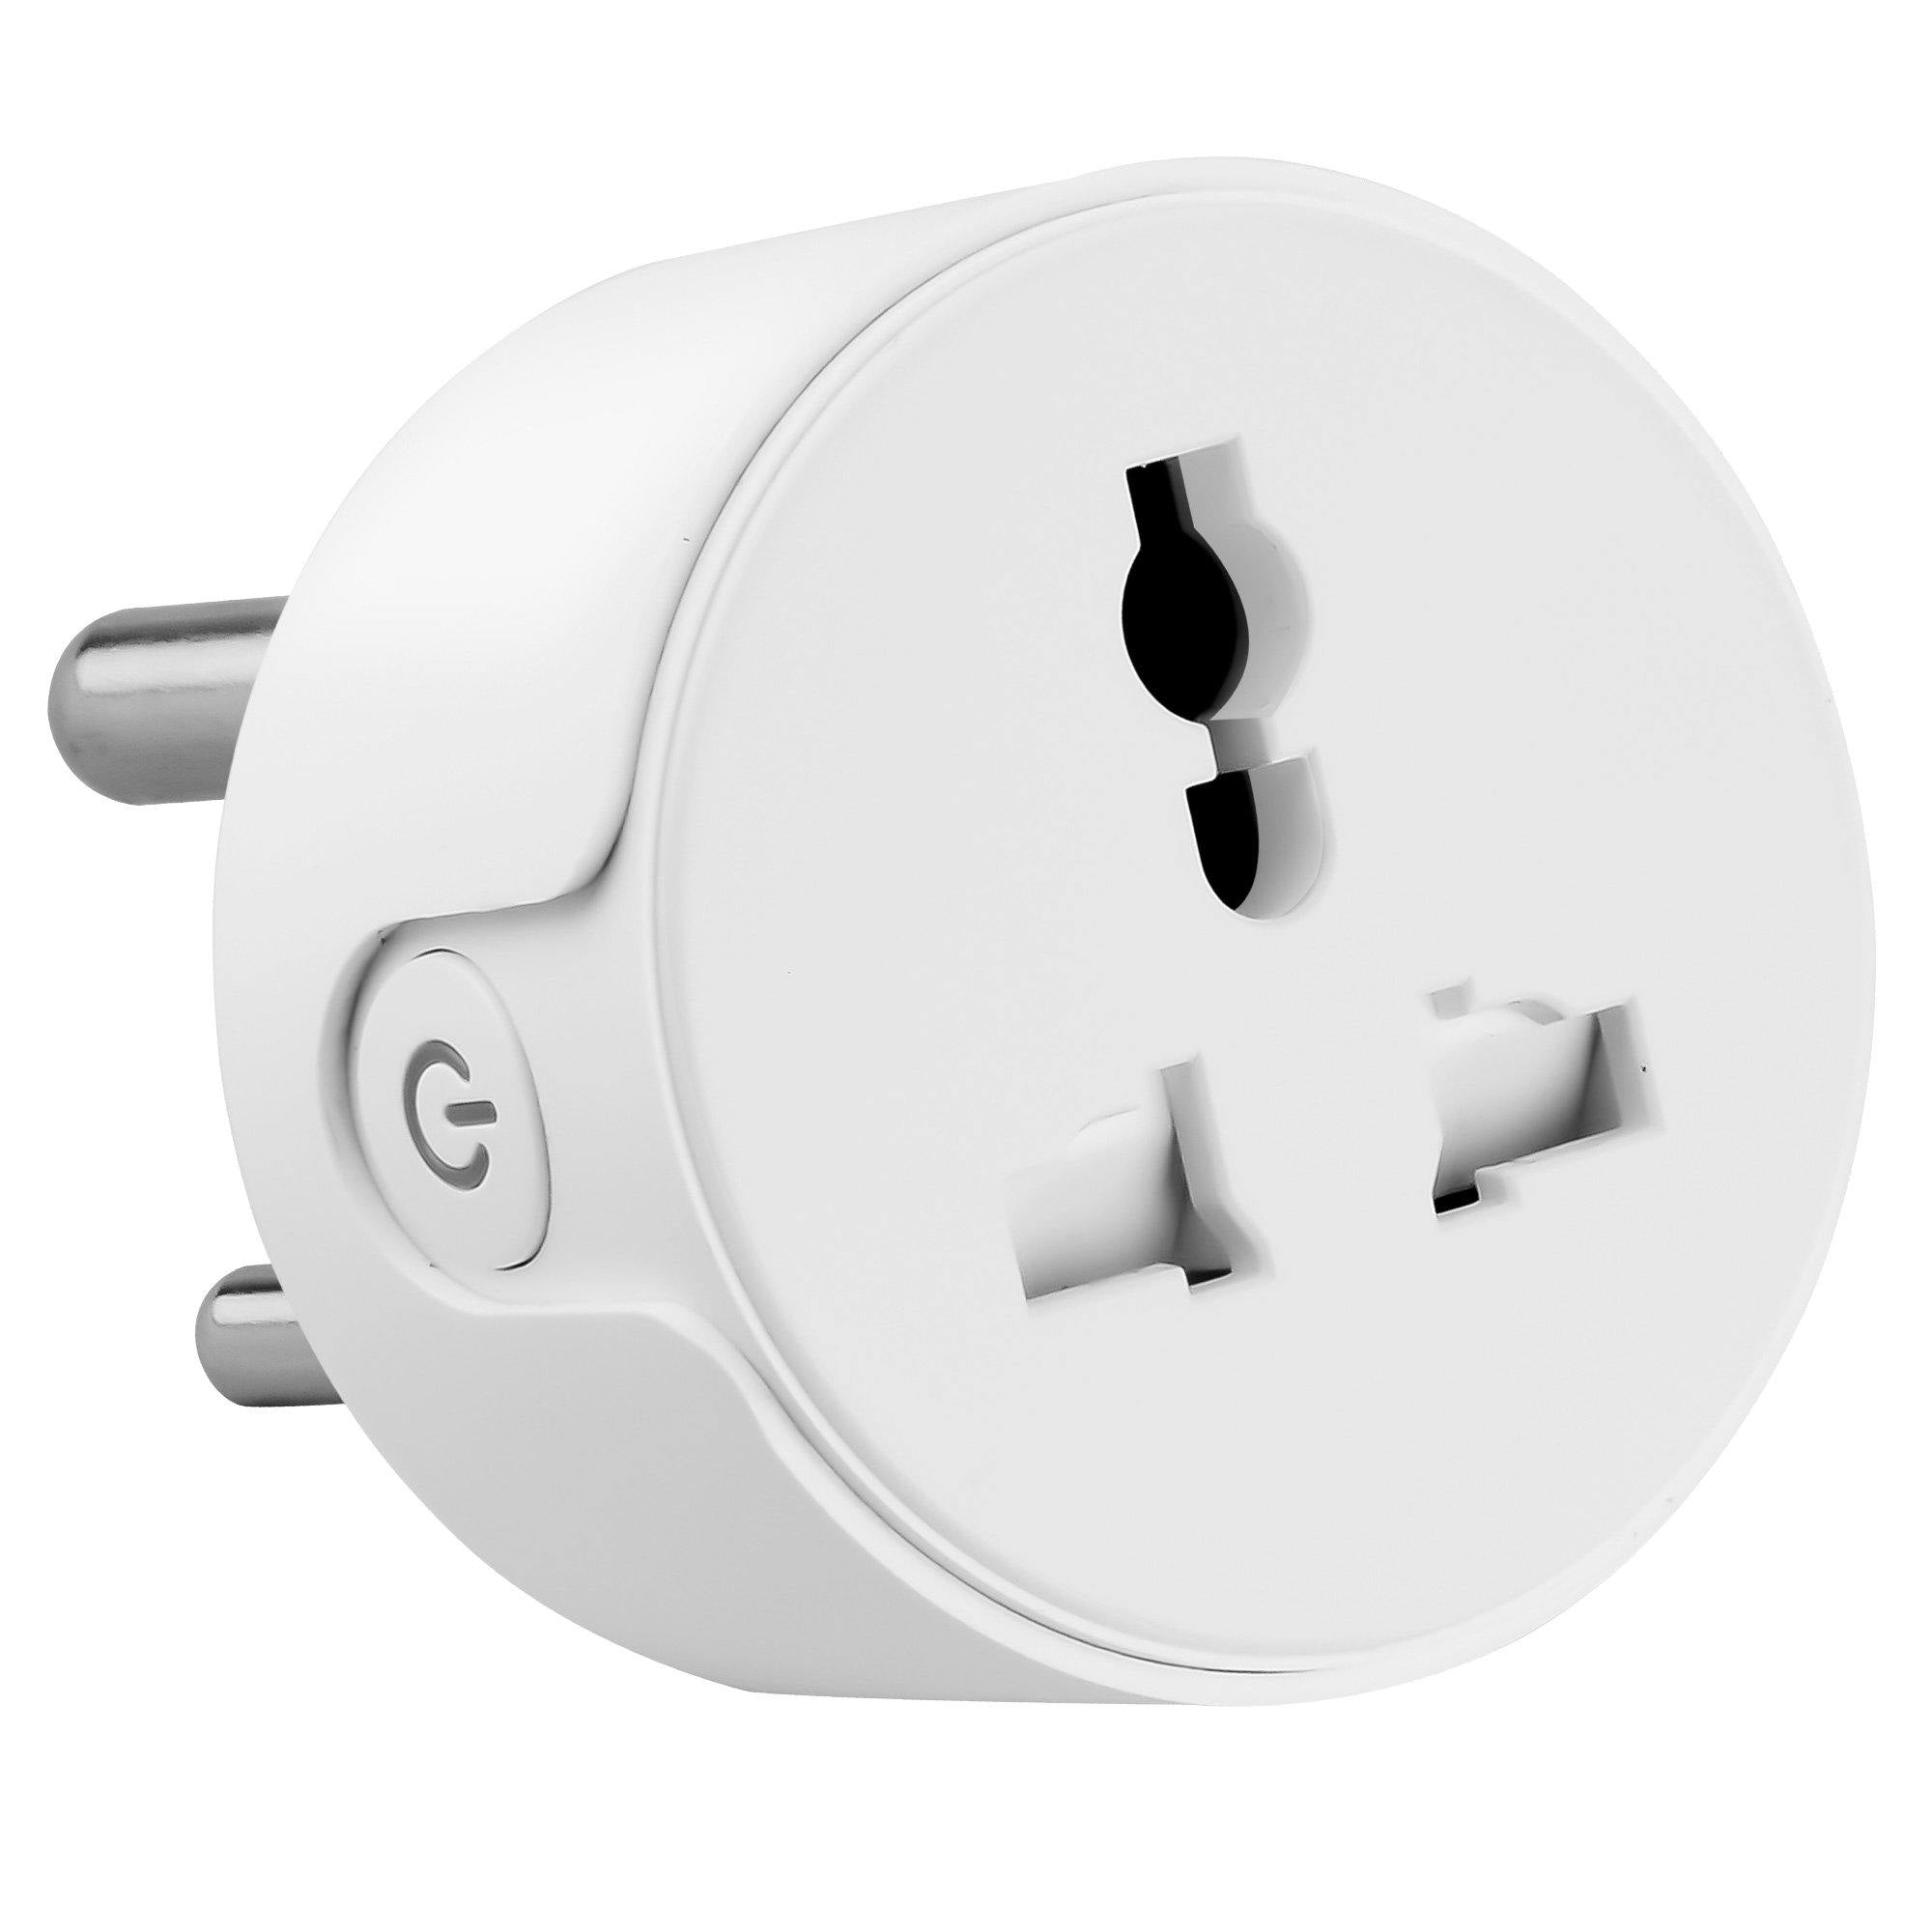 Ambrane WiFi Smart Plug 10A - Control Your Devices from Anywhere, No Hub Required, Works with Amazon Alexa and Google Assistant (ASP-10, White) - AmbraneIndia